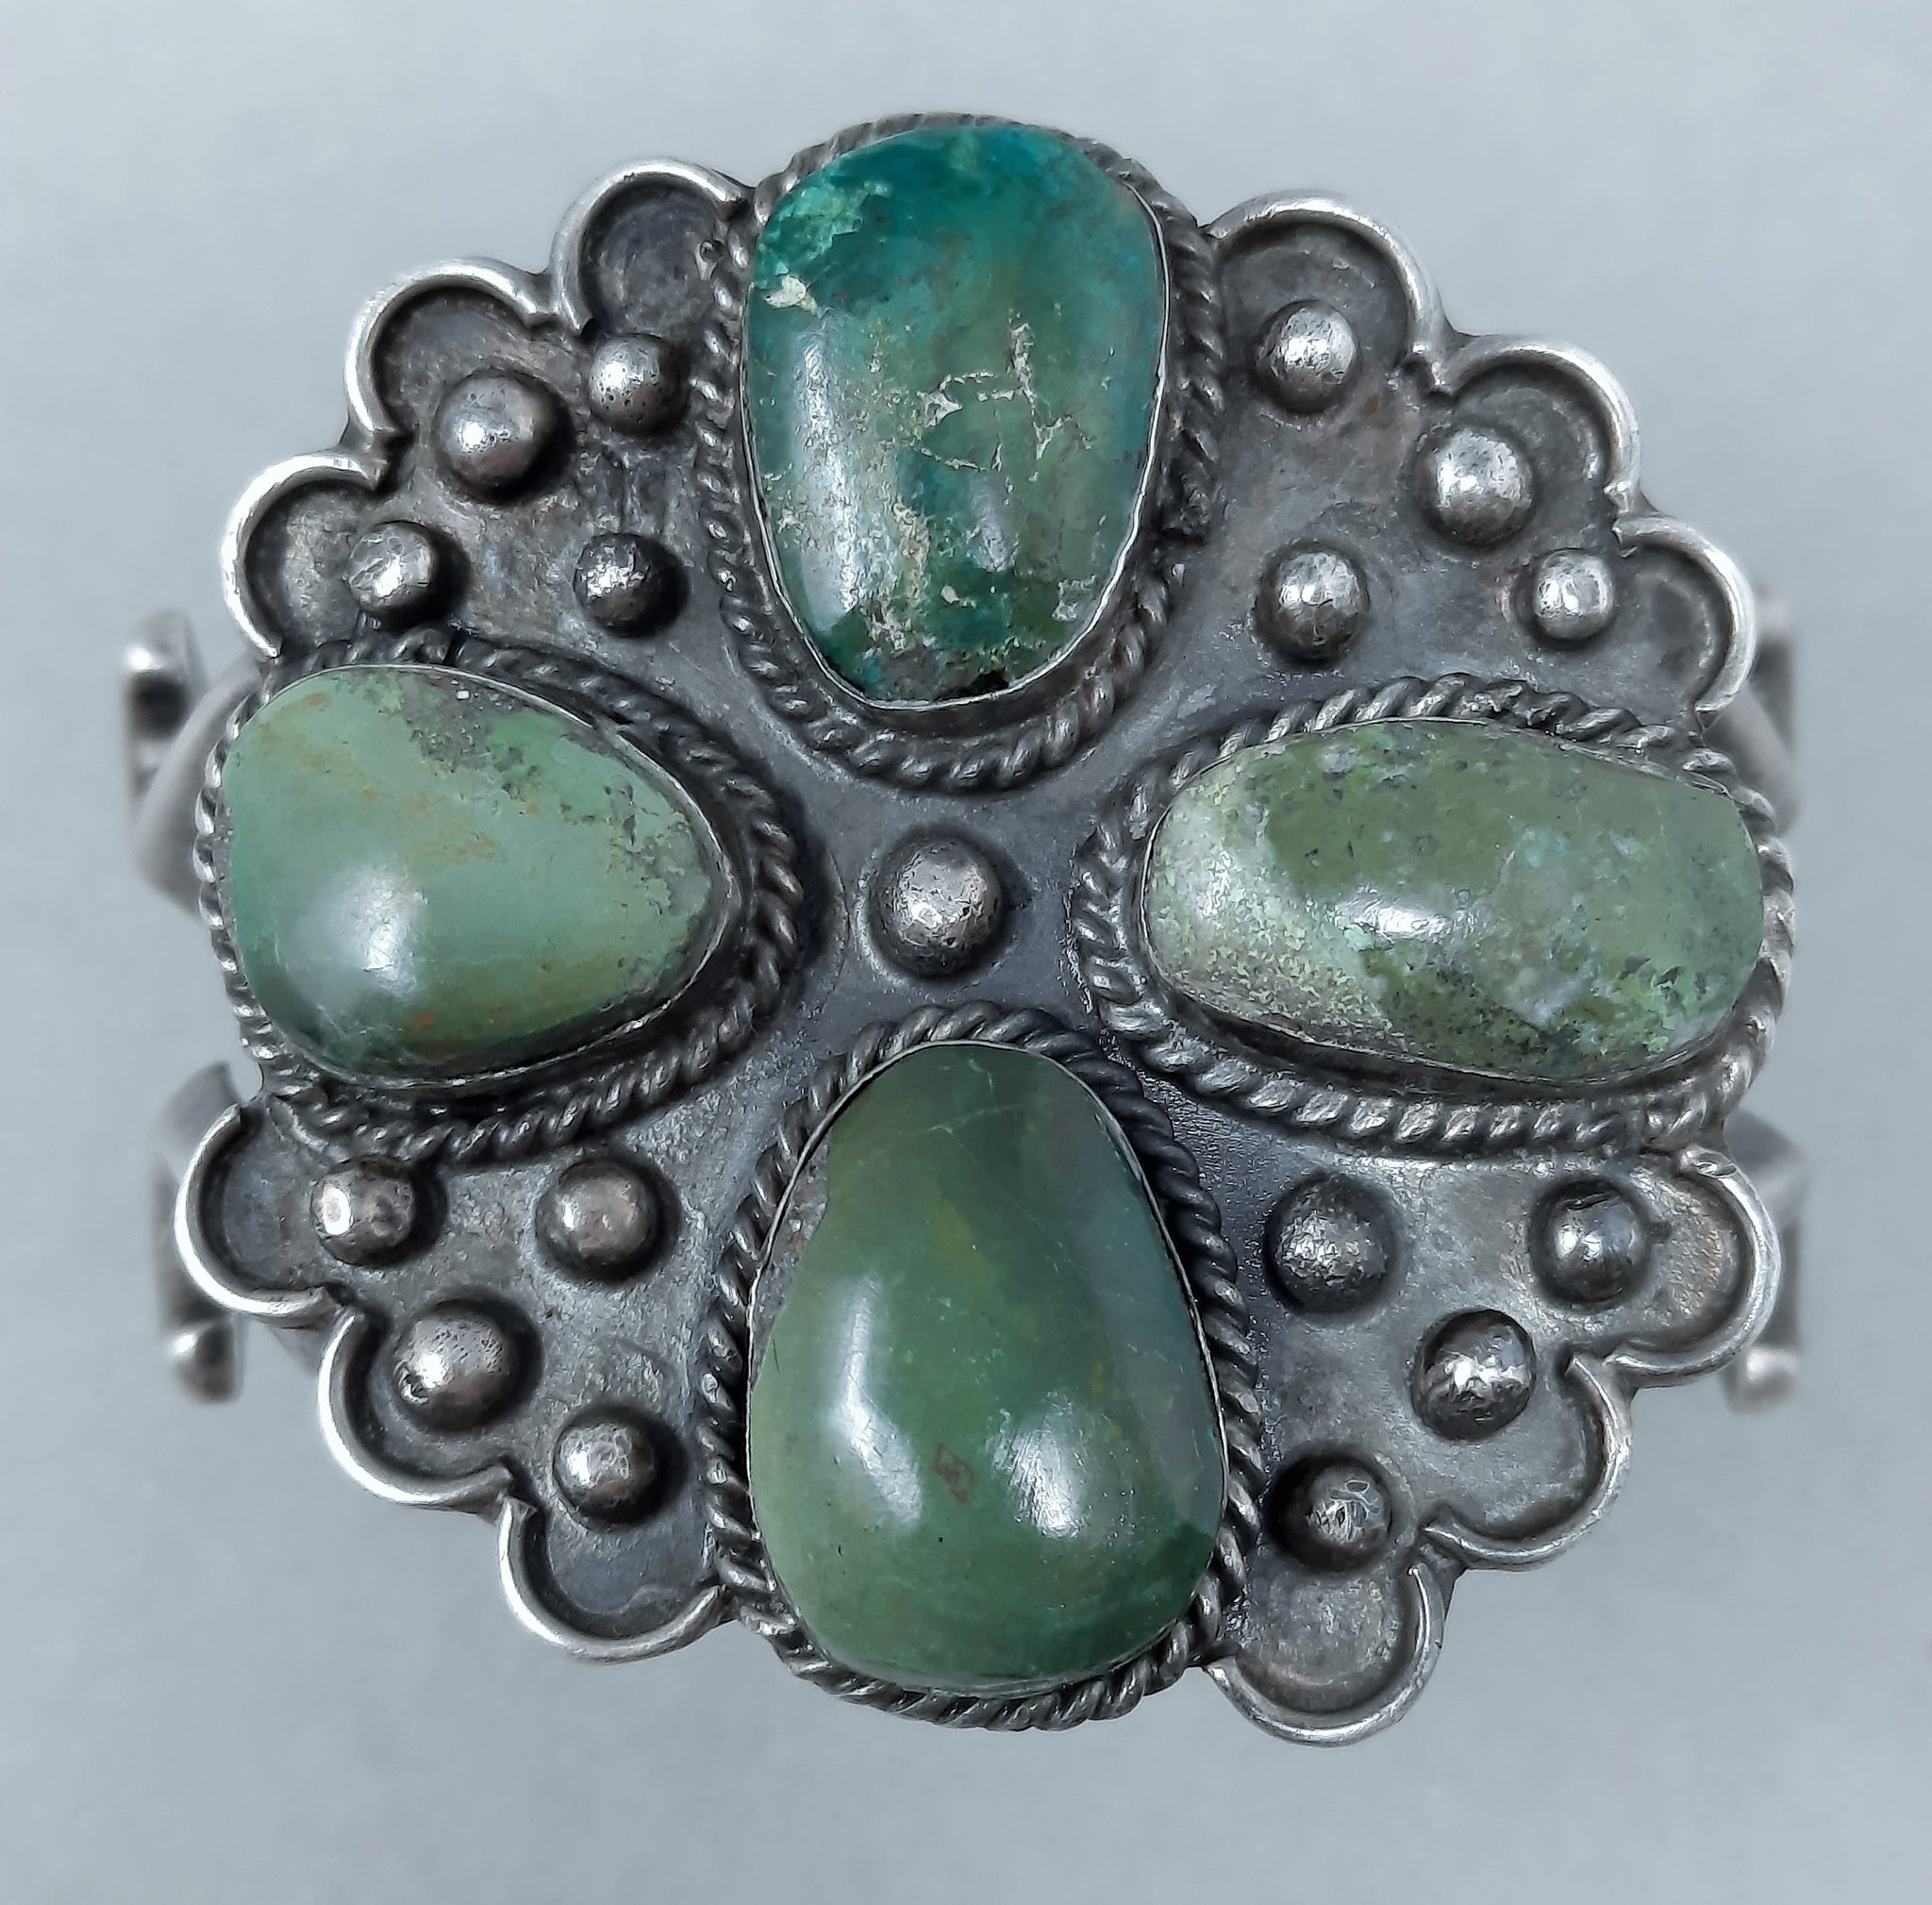 Cast Navajo Silver Green Stone Cuff Bracelet with Blue and Pale Green Stones